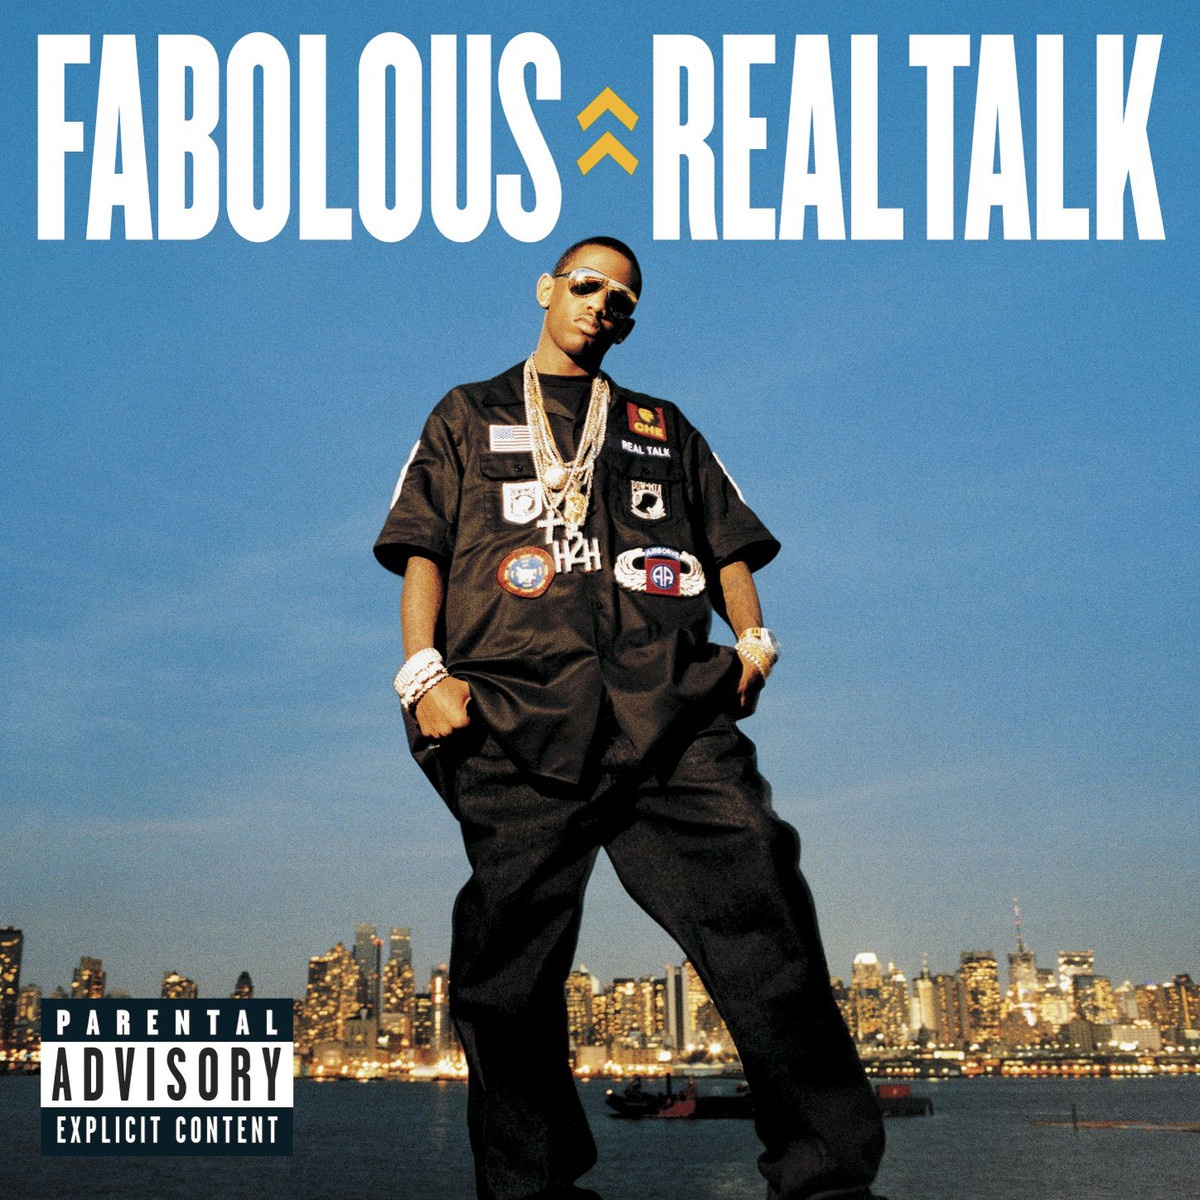 Holla At Somebody Real (Featuring Lil' Mo) (Amended Album Version)